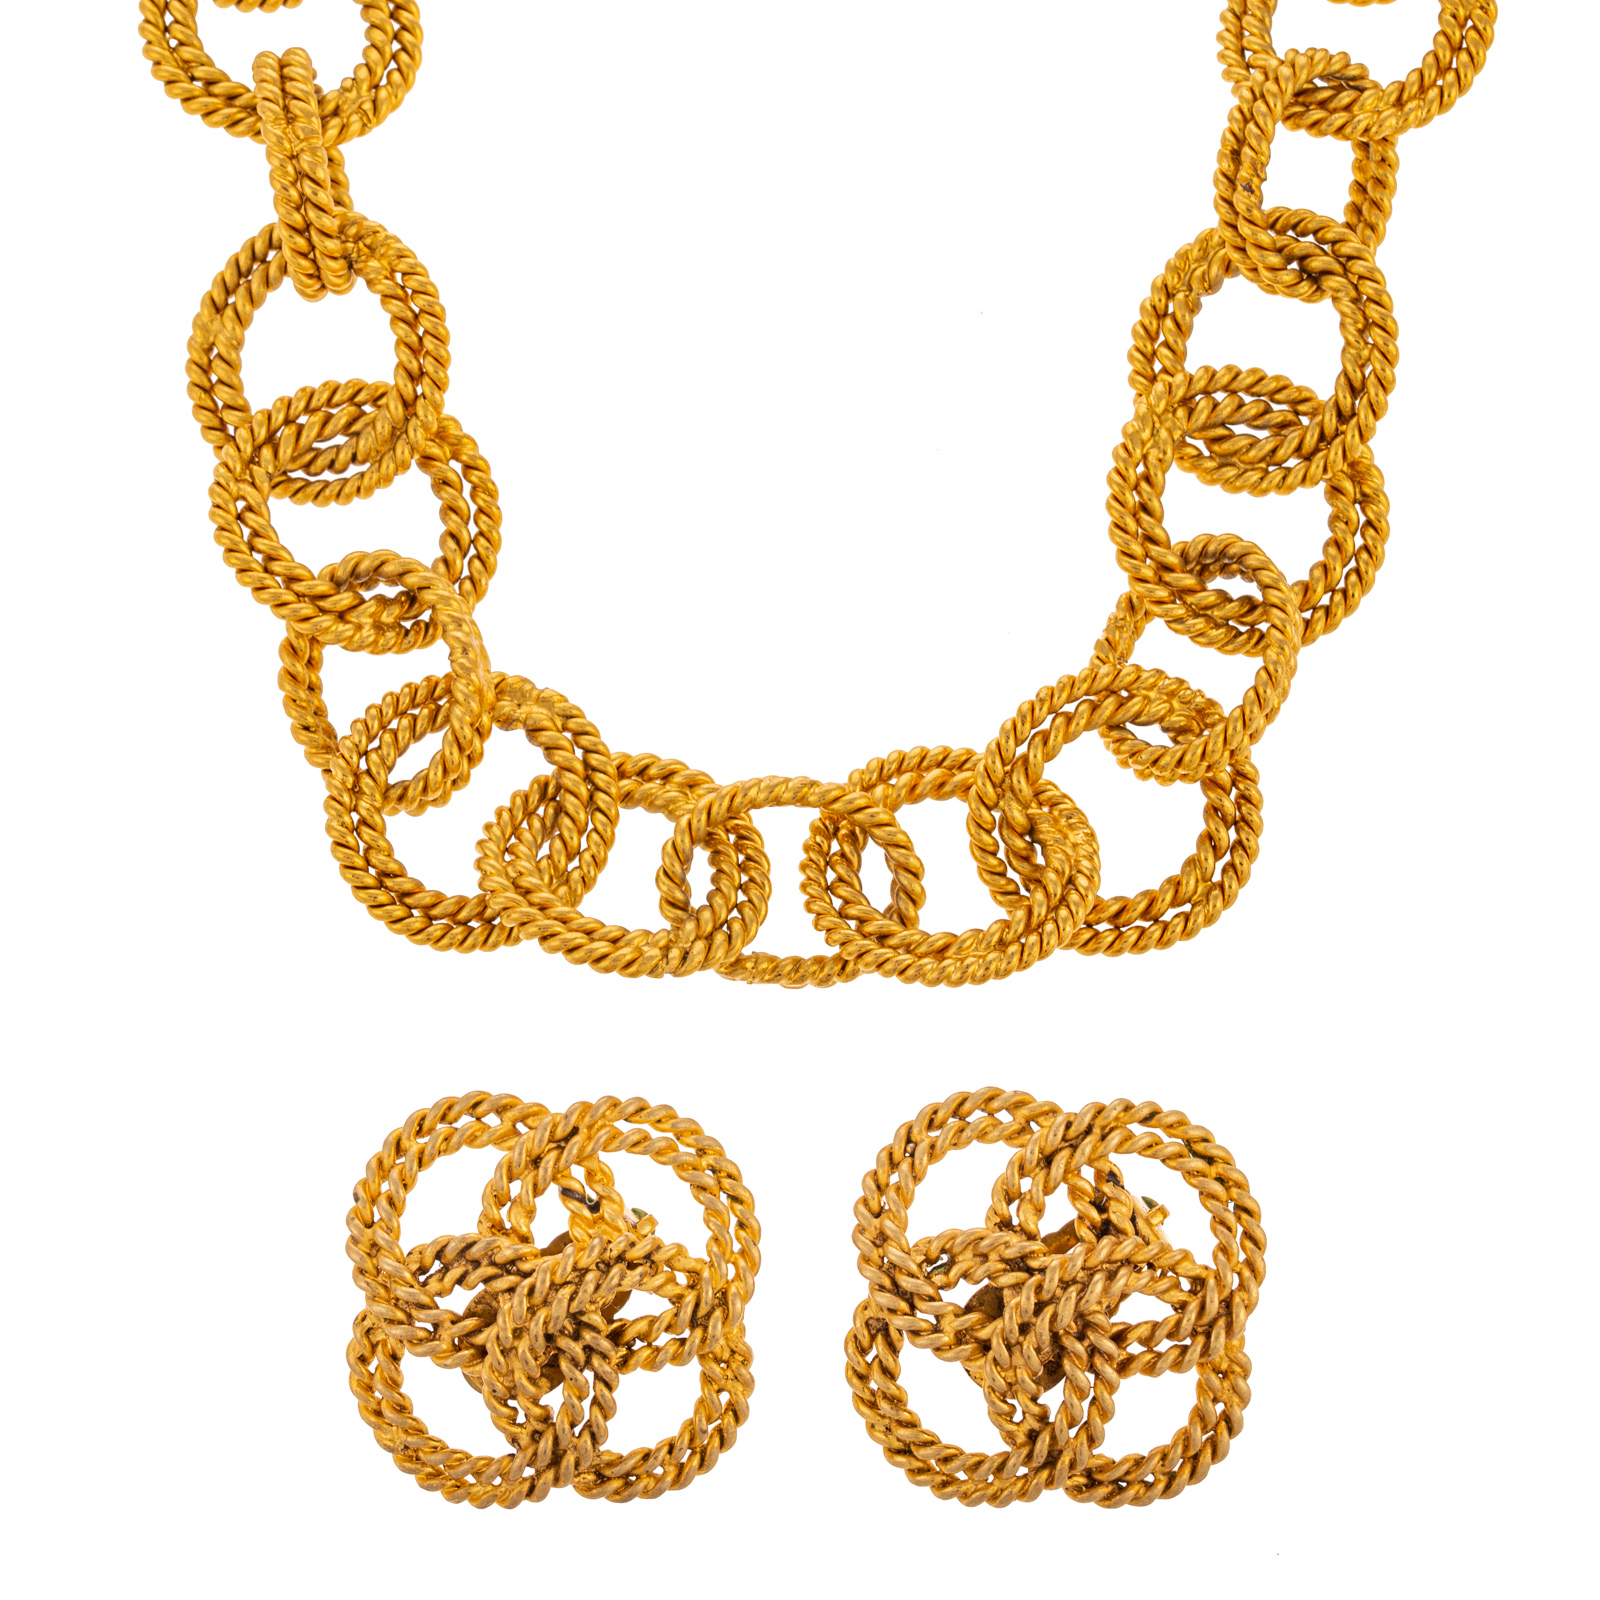 A CHANEL ROPE LINK NECKLACE & EARRINGS